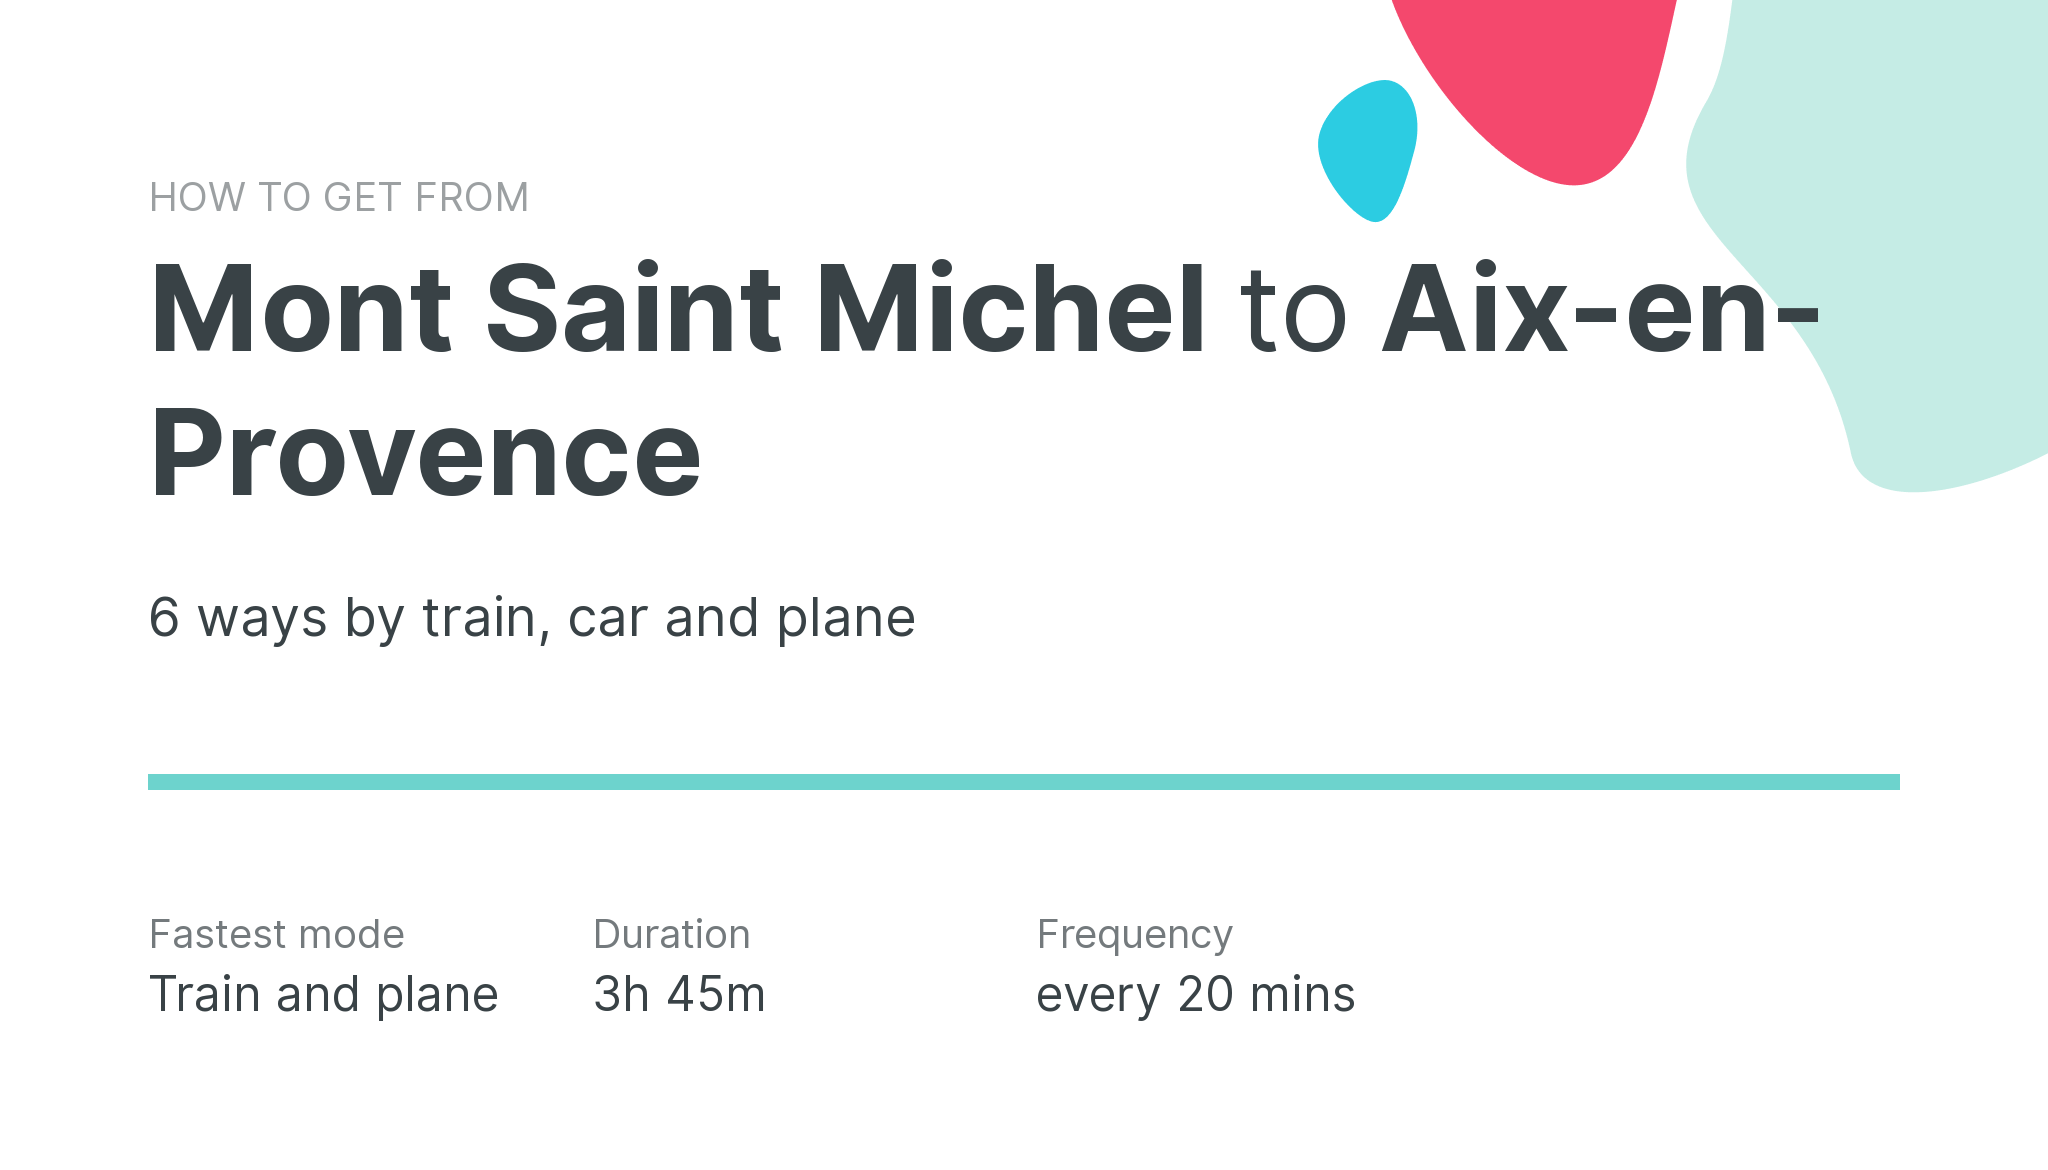 How do I get from Mont Saint Michel to Aix-en-Provence